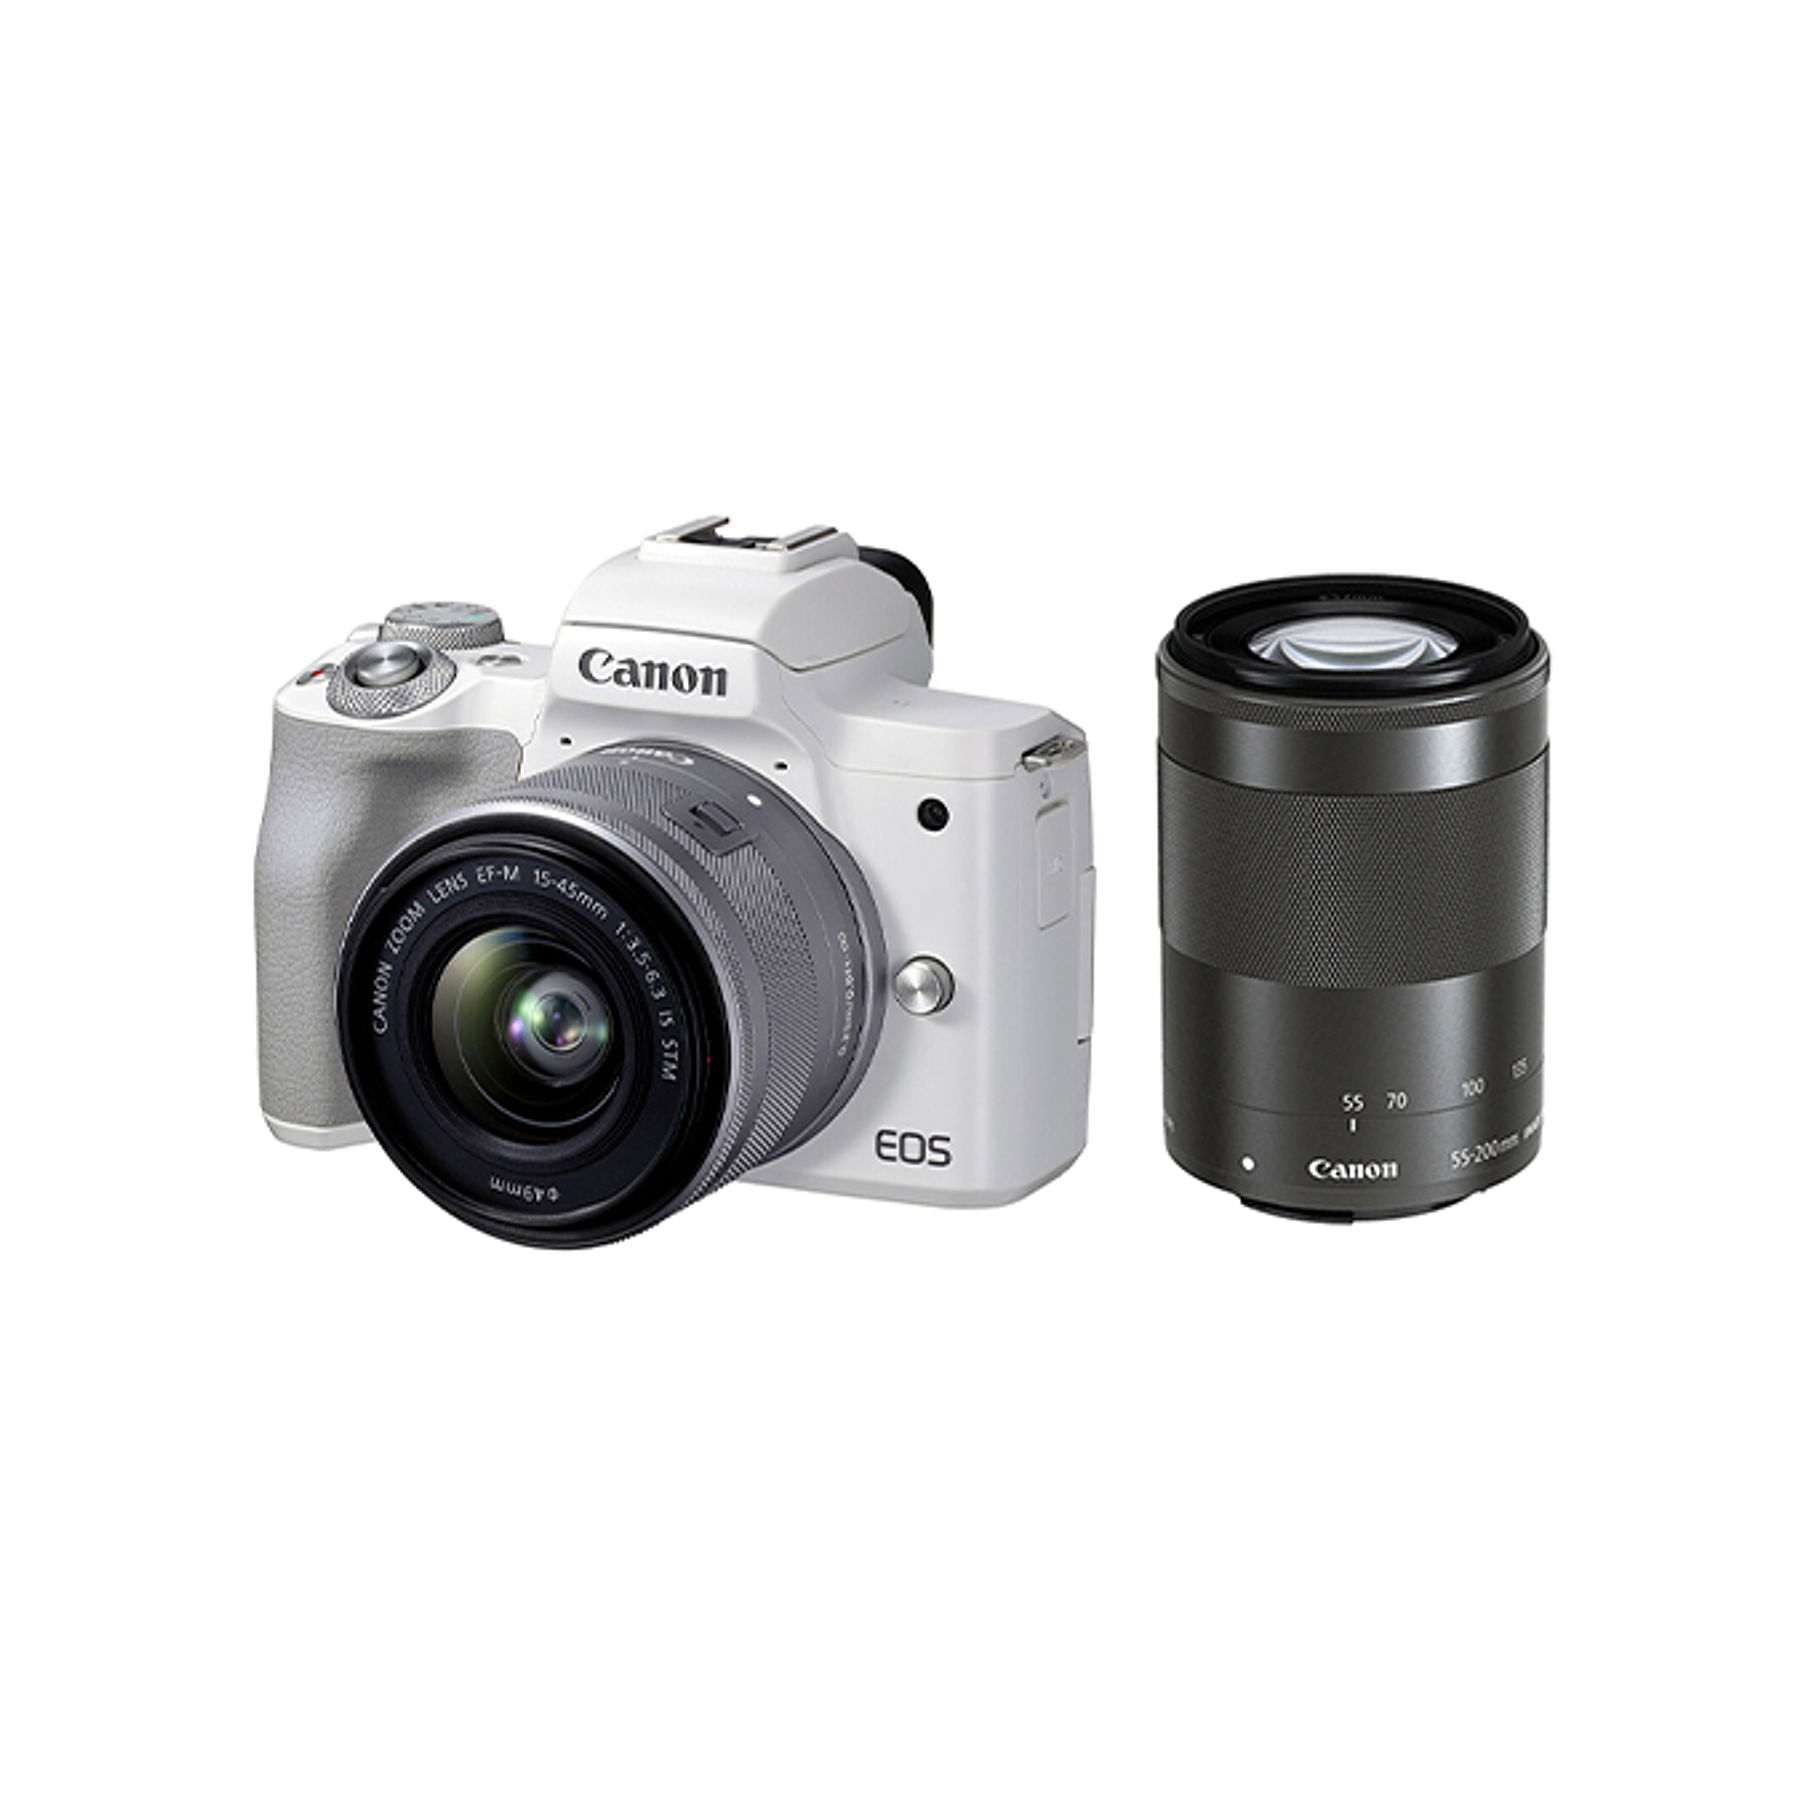 Canon EOS M50 Mark II Blanca + EF-M 15-45mm f/3.5-6.3 IS STM + EF-M 55-200mm f/4.5-6.3 IS STM